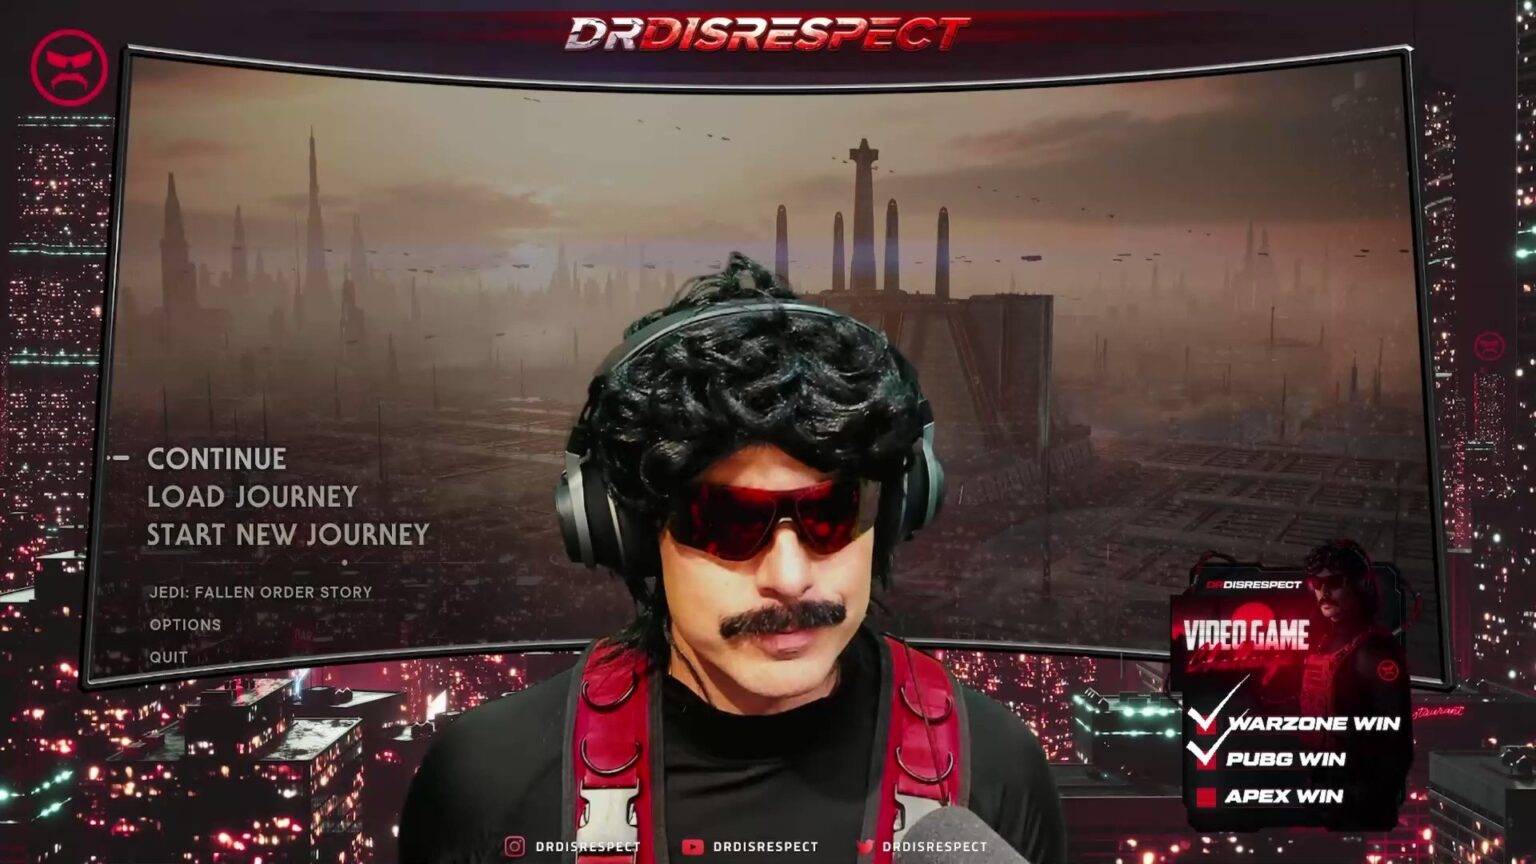 Call Of Duty: Warzone 2 is ‘designed for 85-year-old men’ says Dr Disrespect